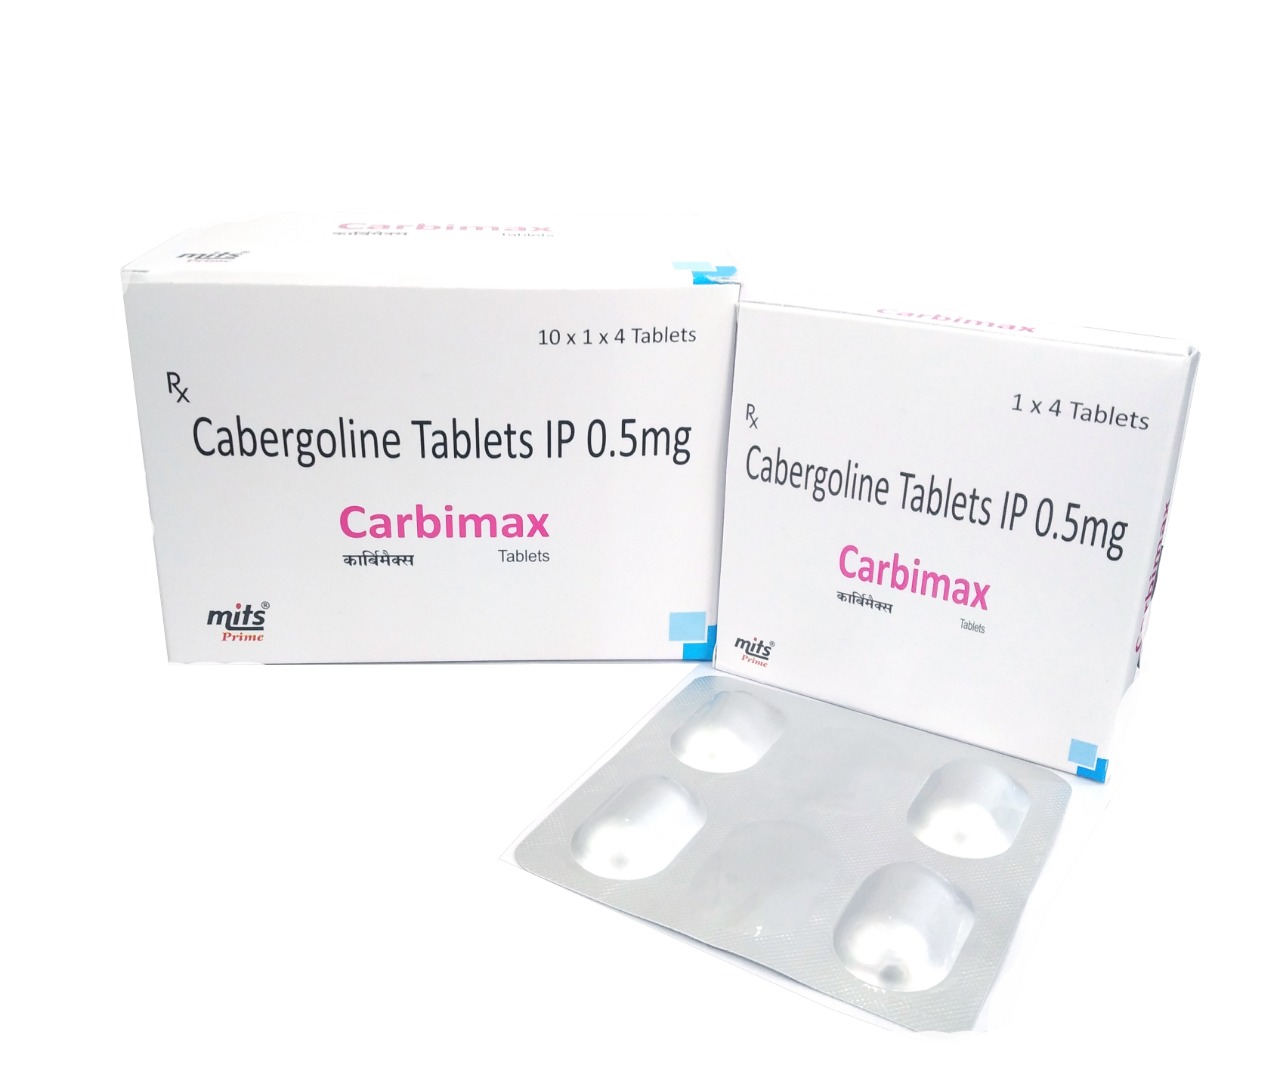 CARBIMAX Tablets